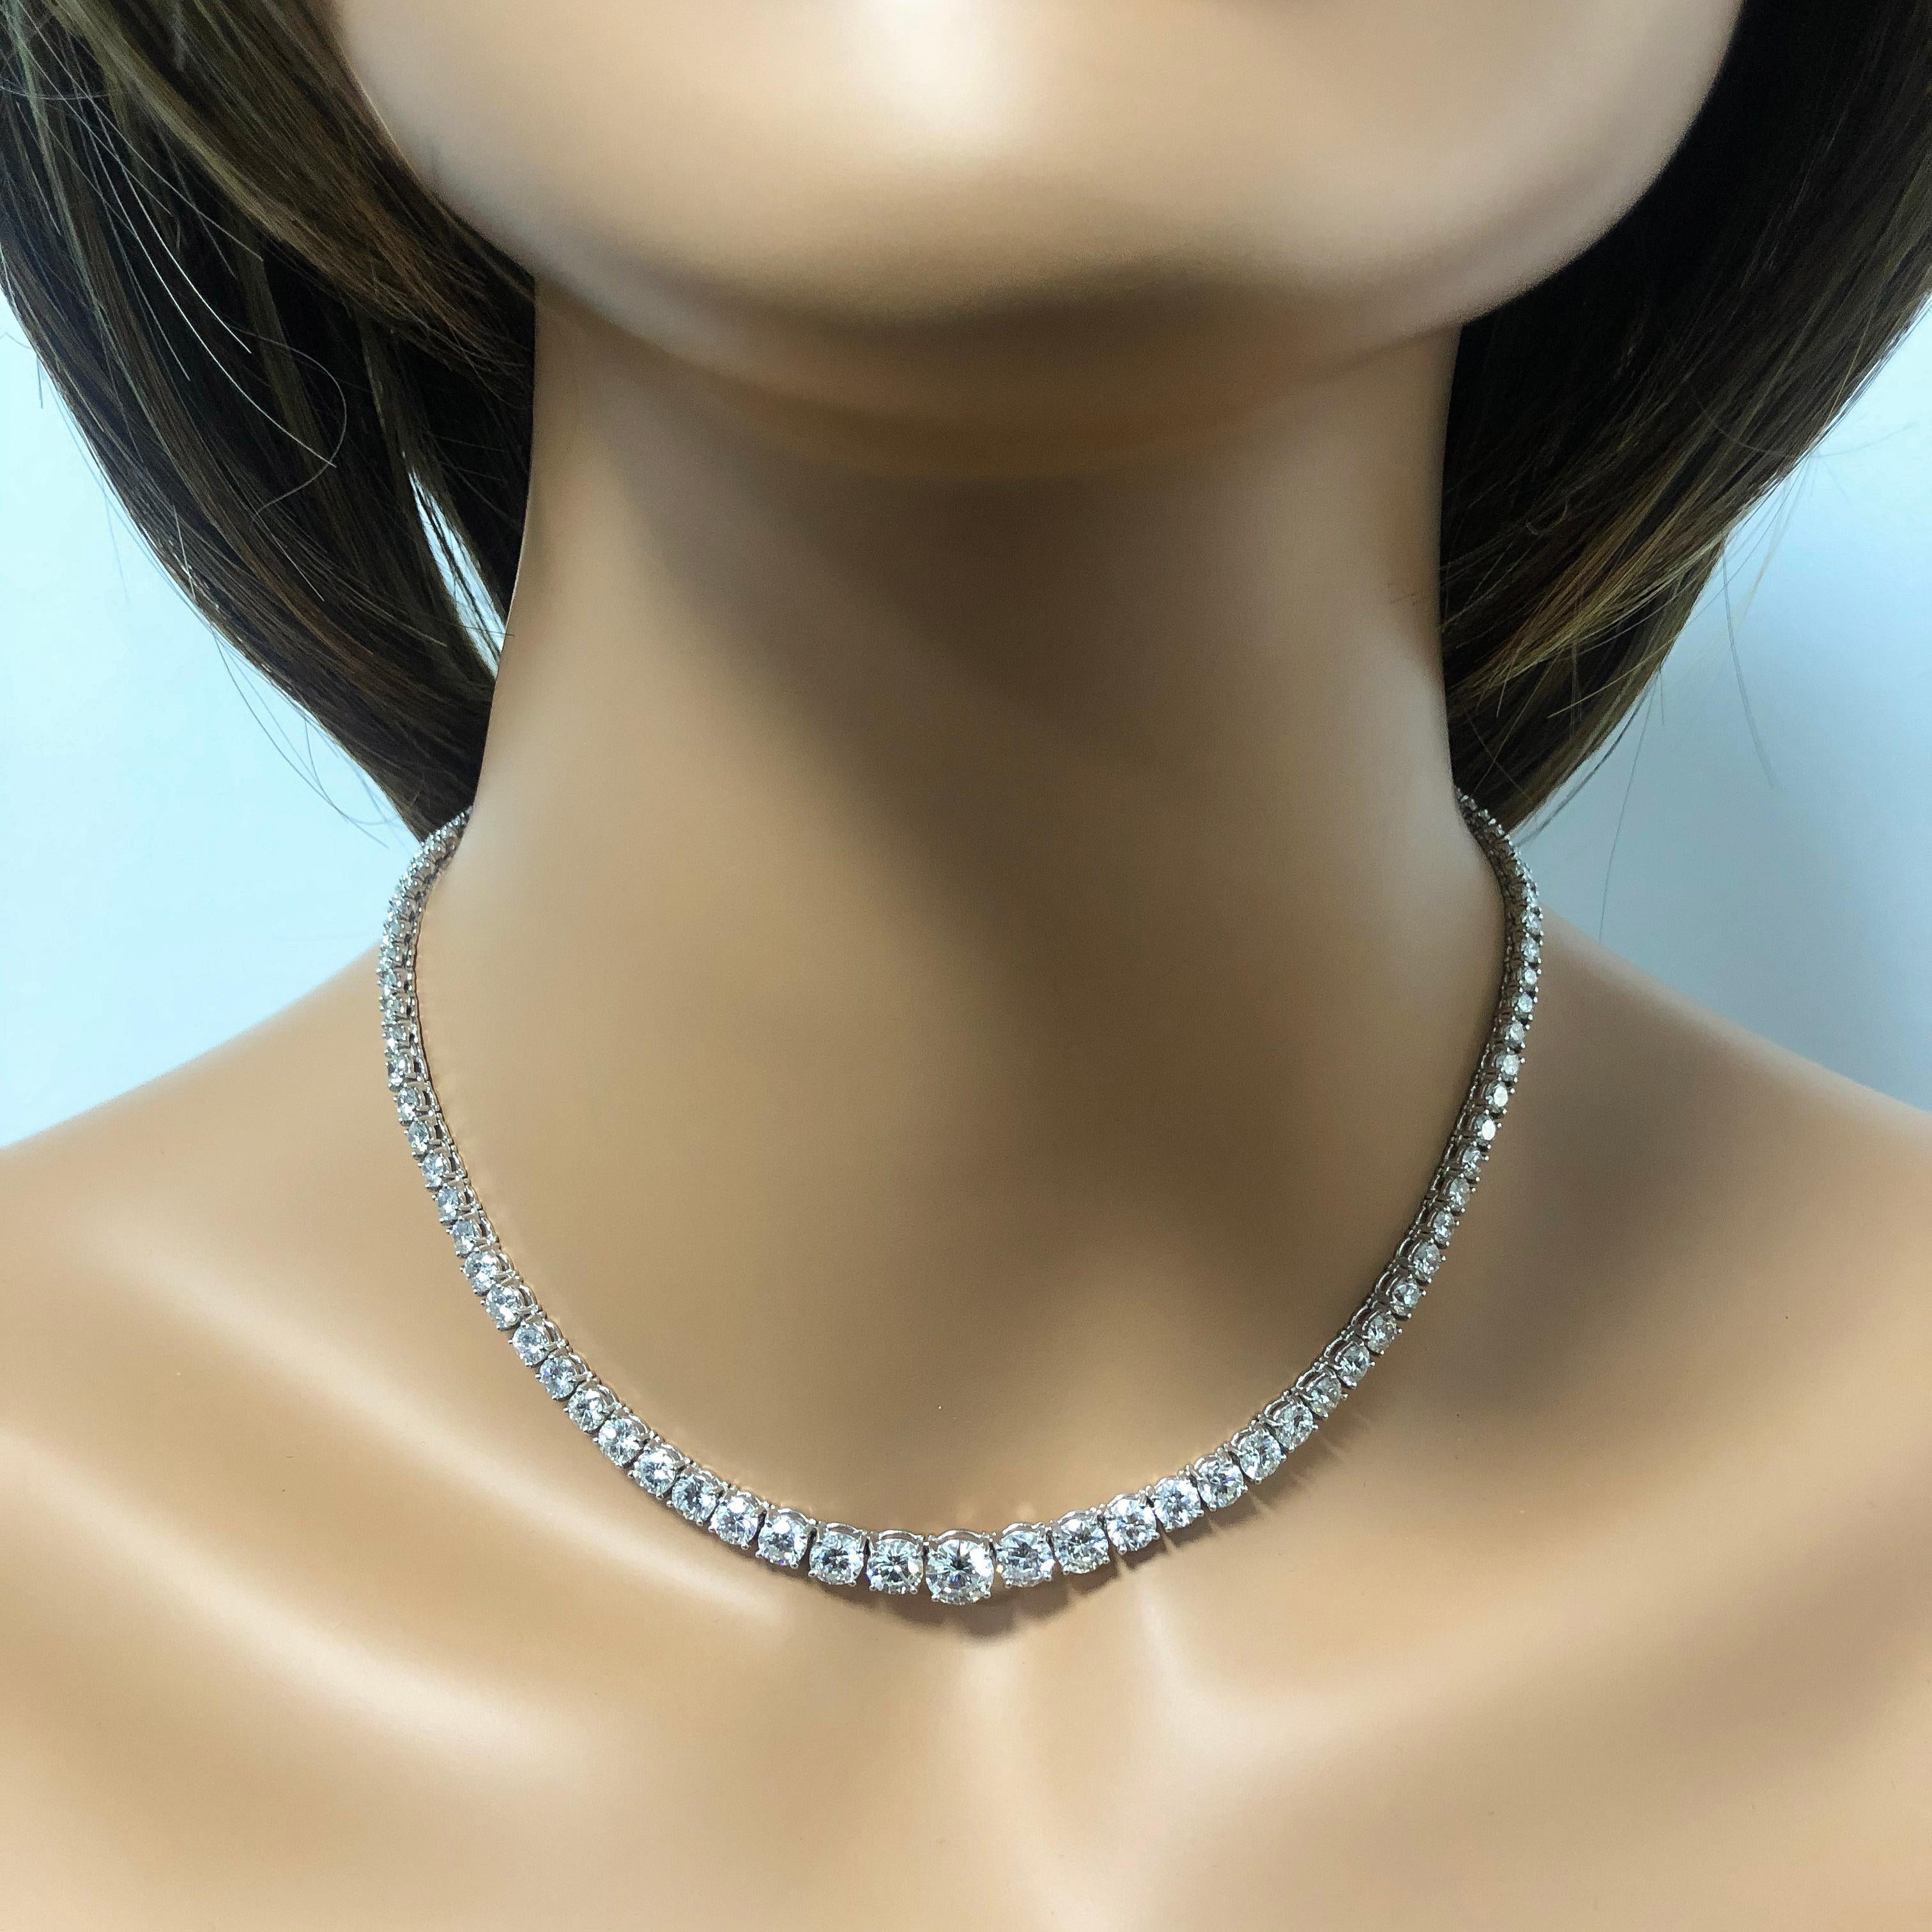 This is a very elegant necklace set with round brilliant diamonds that graduate bigger as it gets to the center. Diamonds weigh 17.82 carats, and the center stone weighs 1.04 carats with a total weight of 18.86 carats, F-G Color and VS in Clarity.